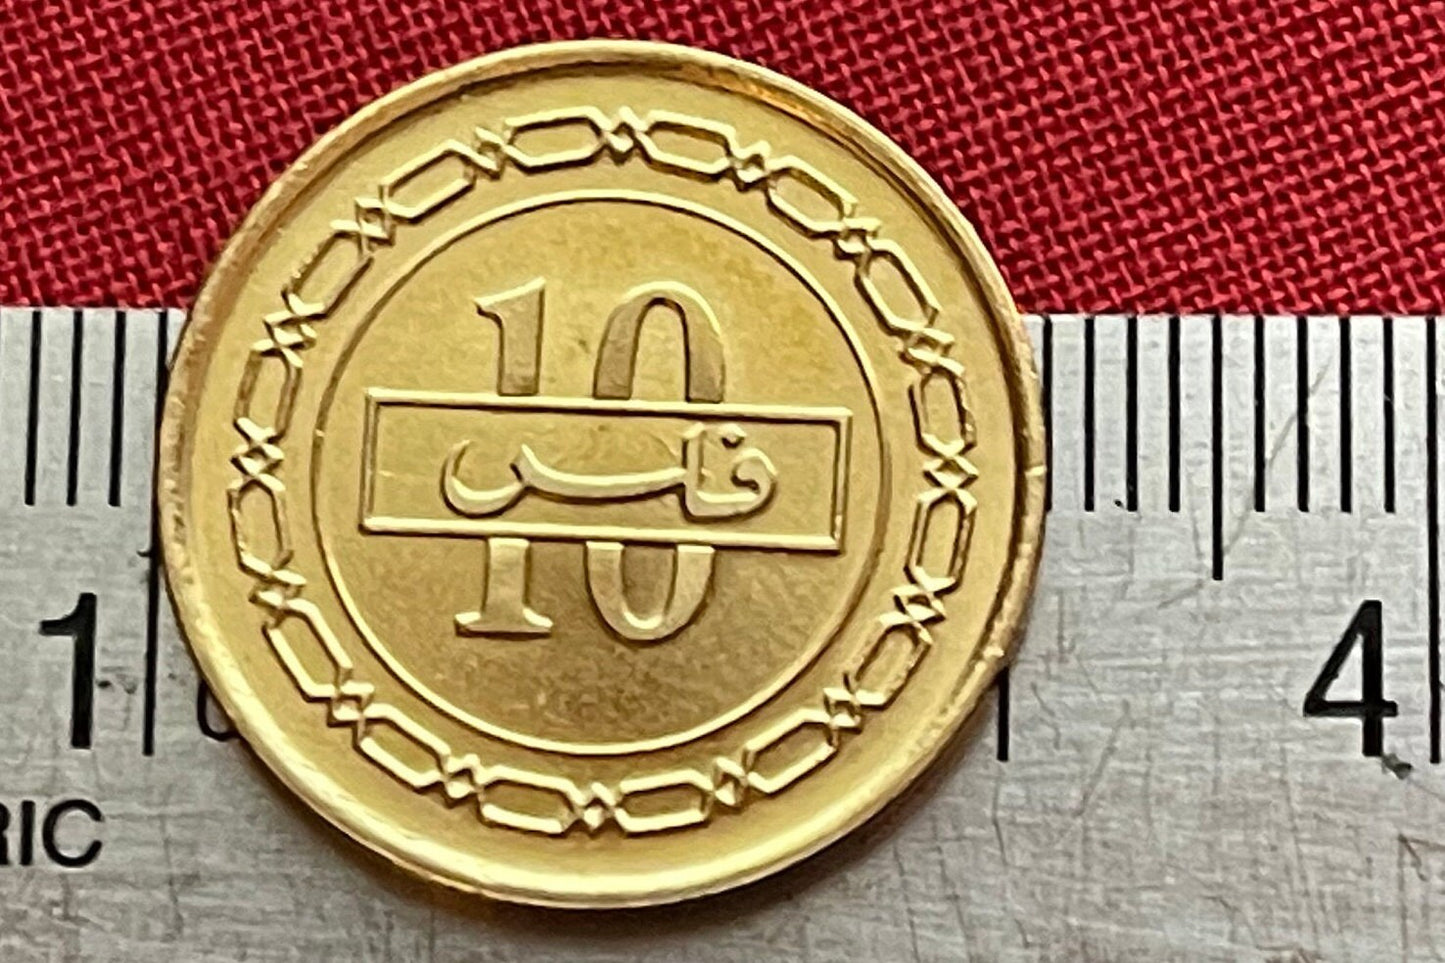 Garden of Eden Date Palm 10 Fils Bahrain Authentic Coin Money for Jewelry (Dilmun) (Paradise) (Adam and Eve) (Million Palms) (Creation)